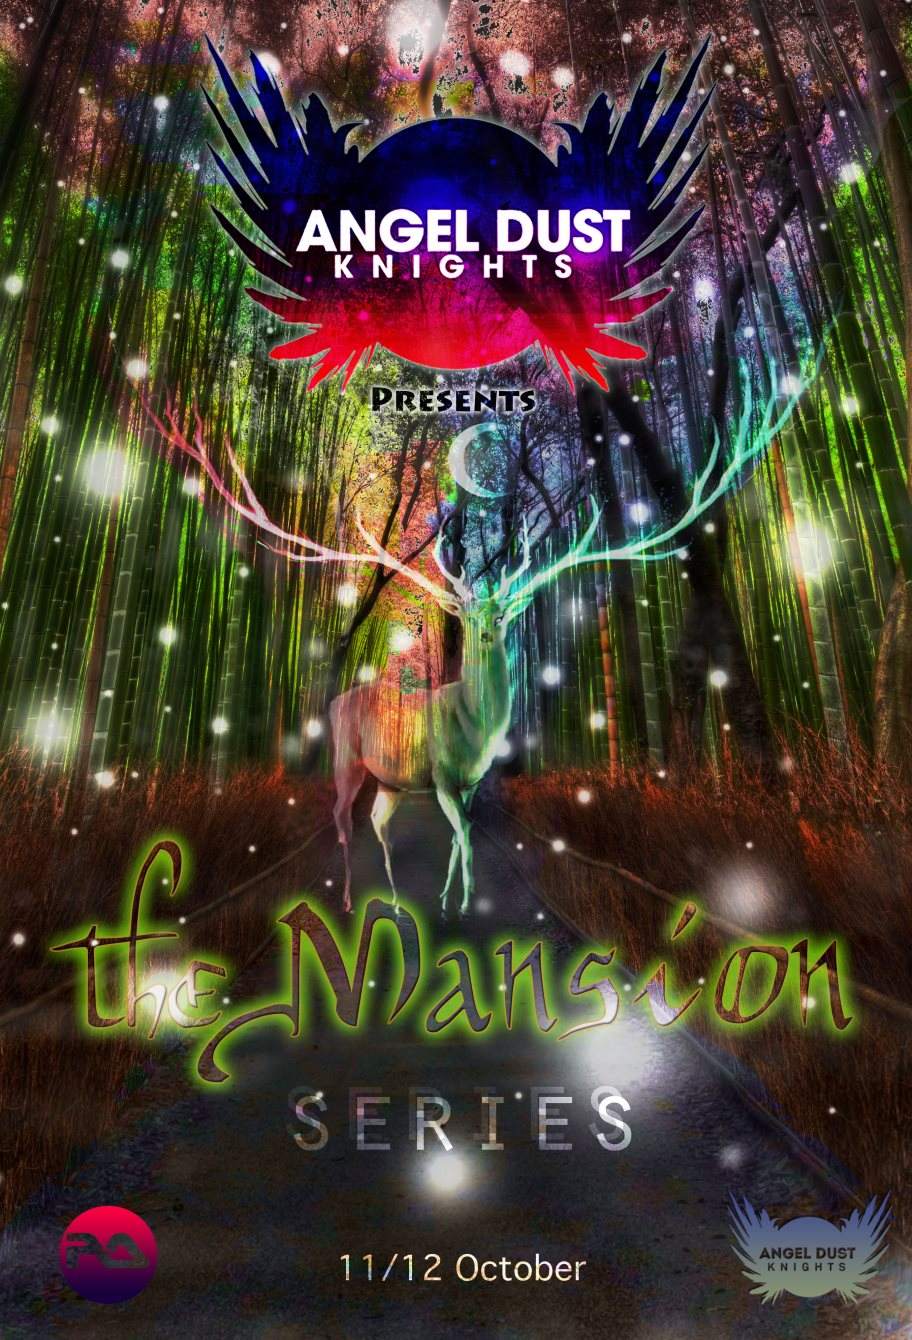 Angel Dust presents The Mansion Series - フライヤー表